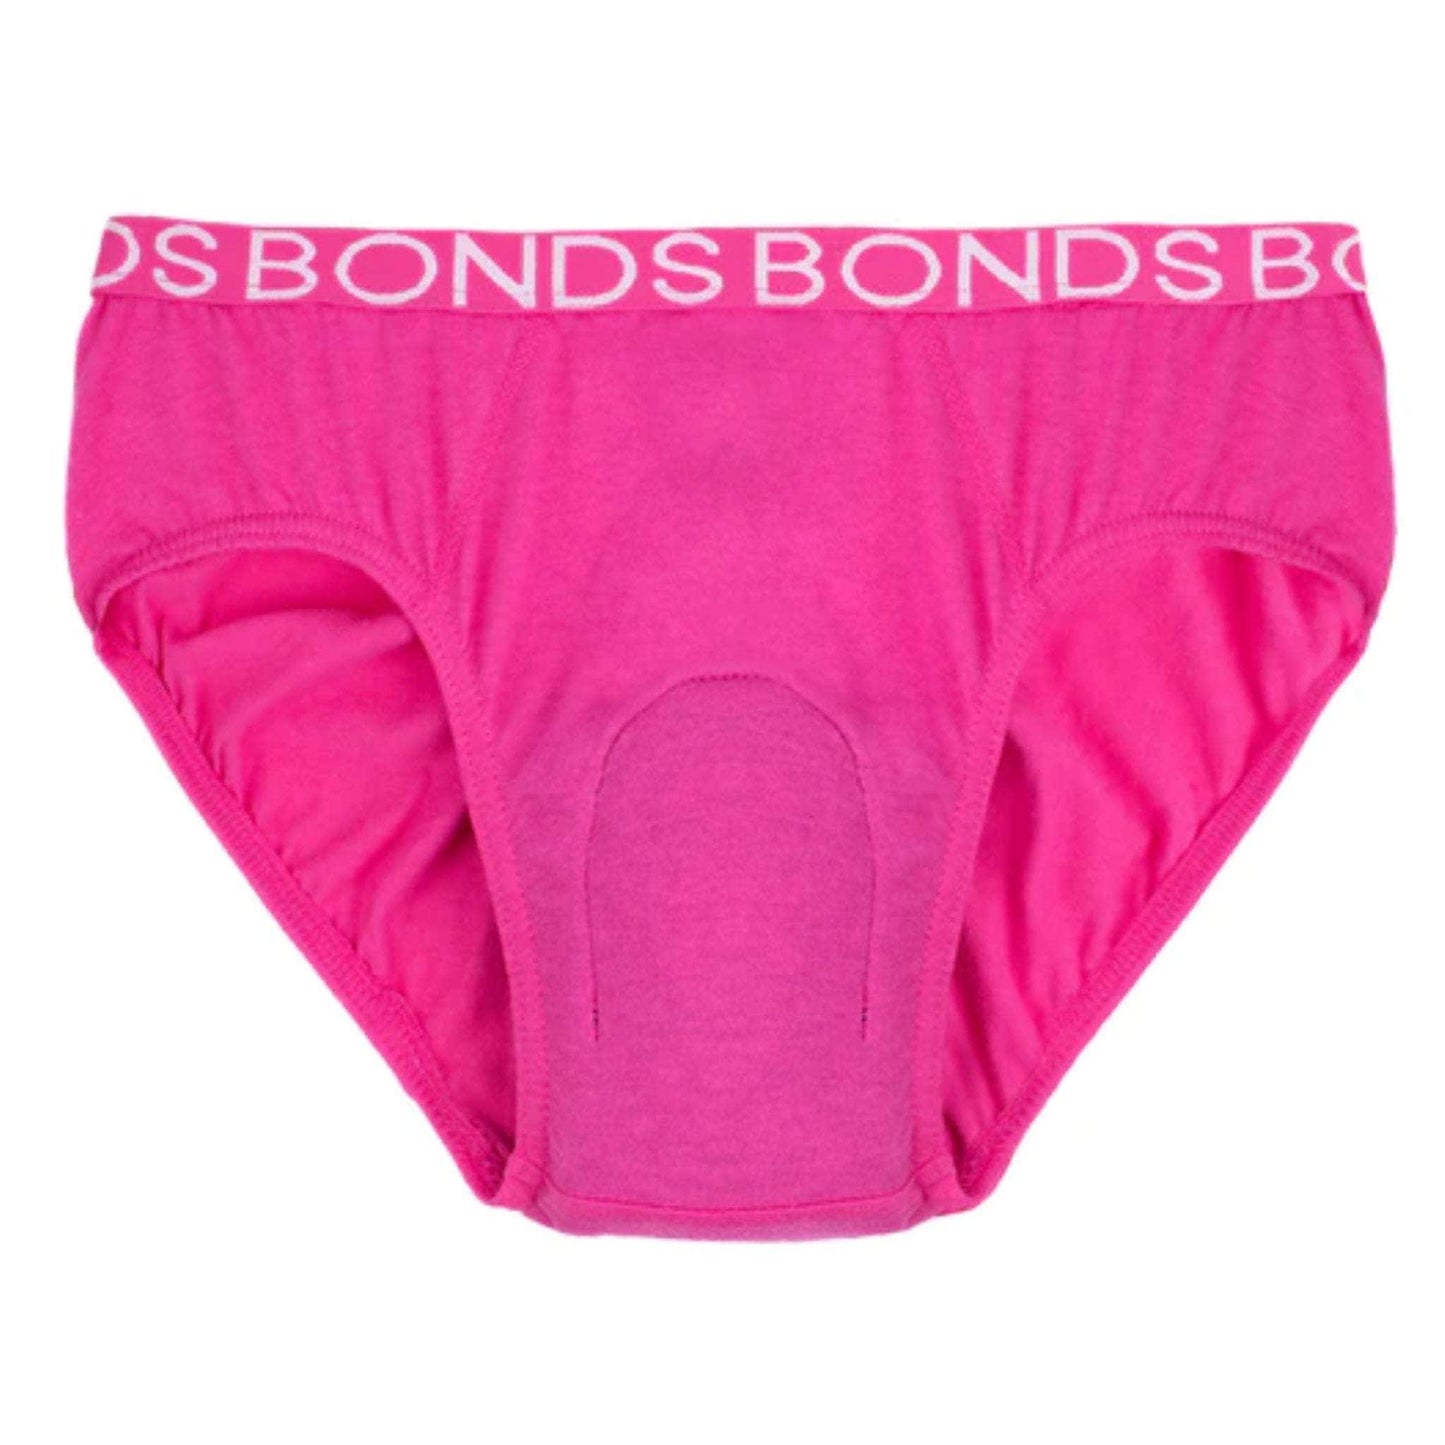 Girl's Bonds Hipster Incontinence Underwear 400ml - SINGLE - Caring Clothing